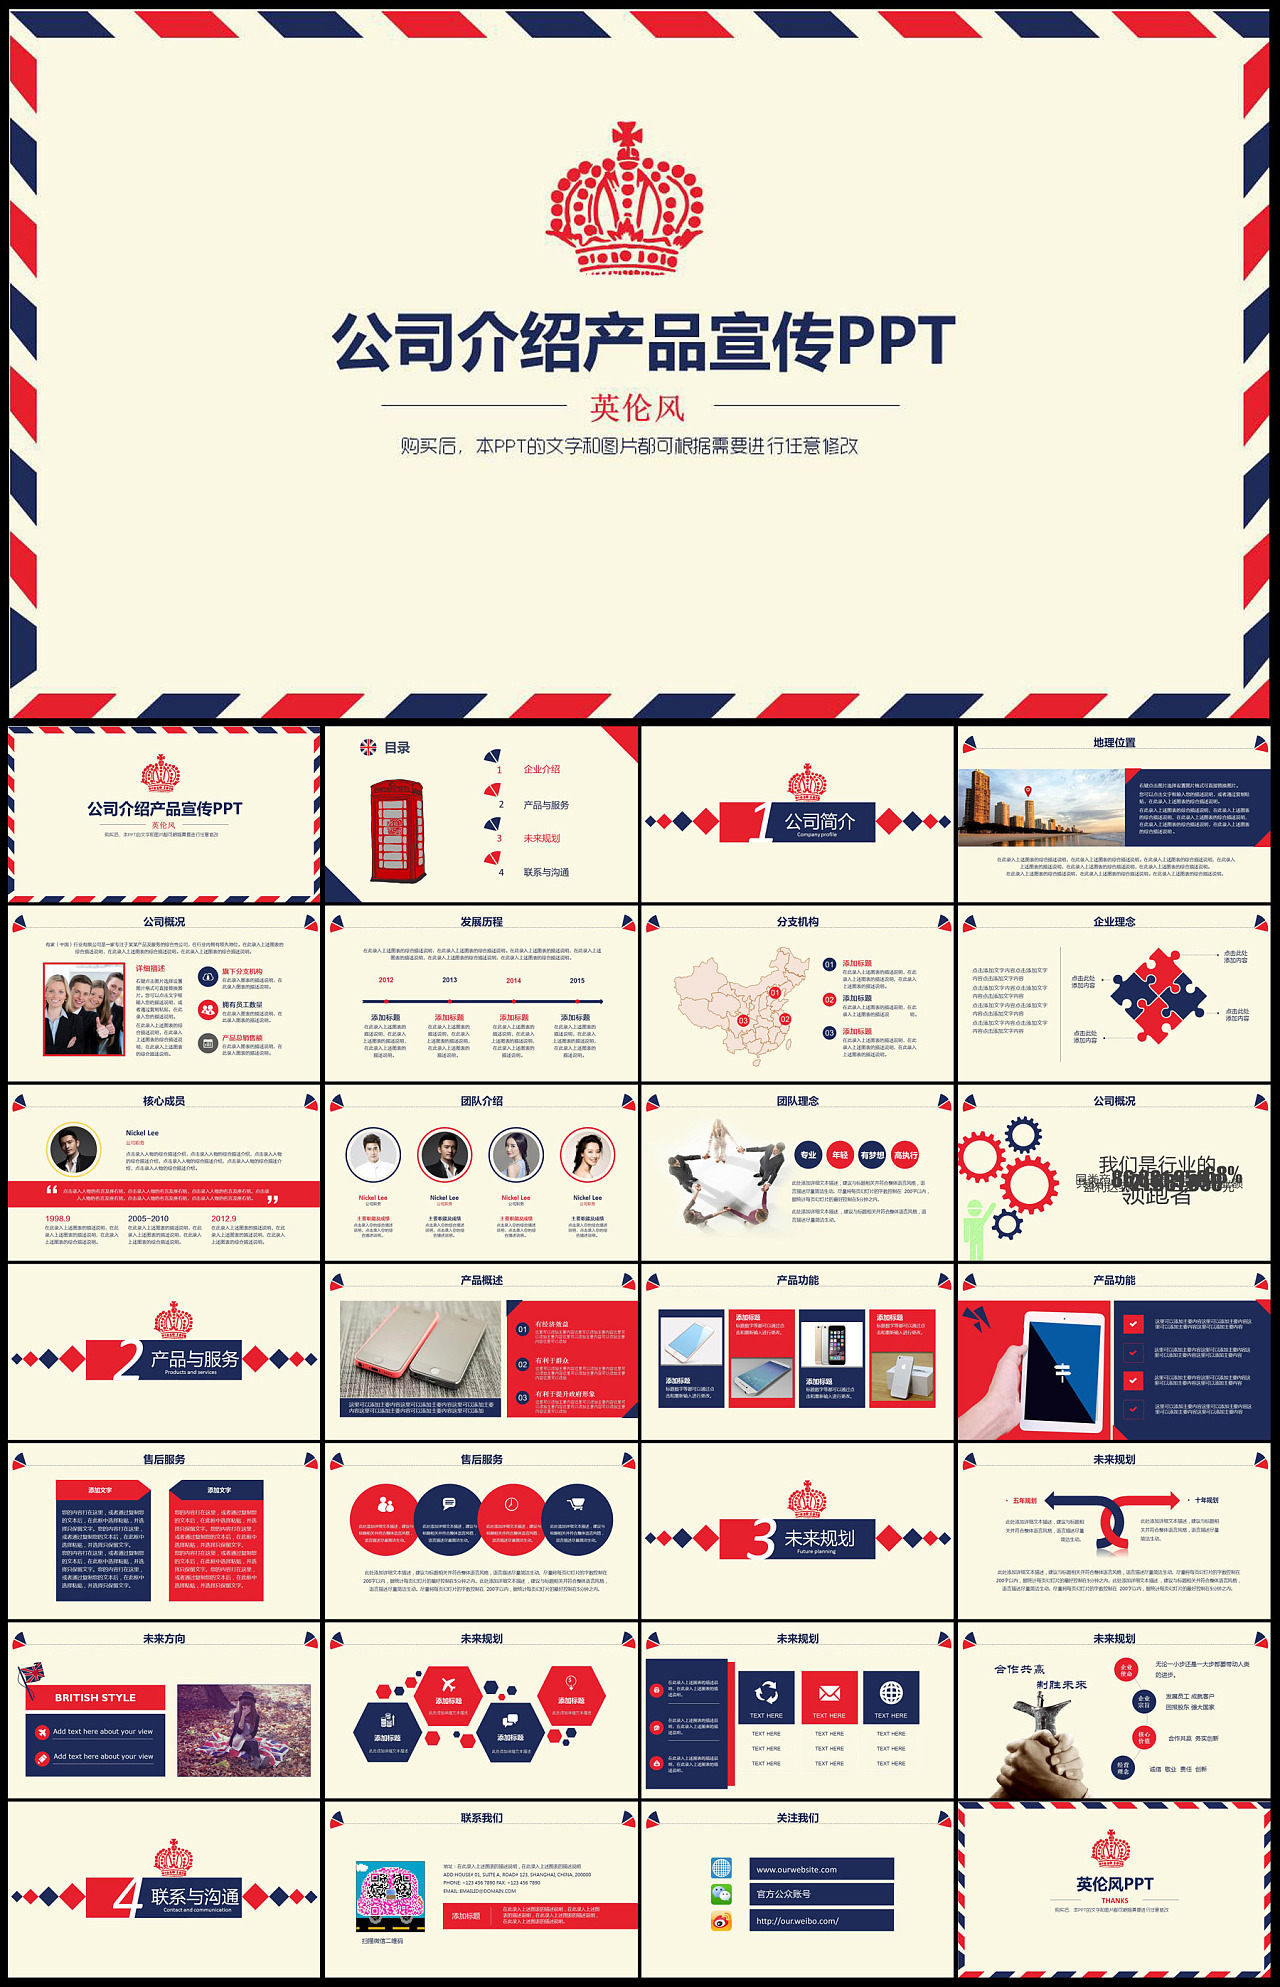 British style corporate culture promotion company introduction product display PPT (friends who need templates can find my information and contact me)